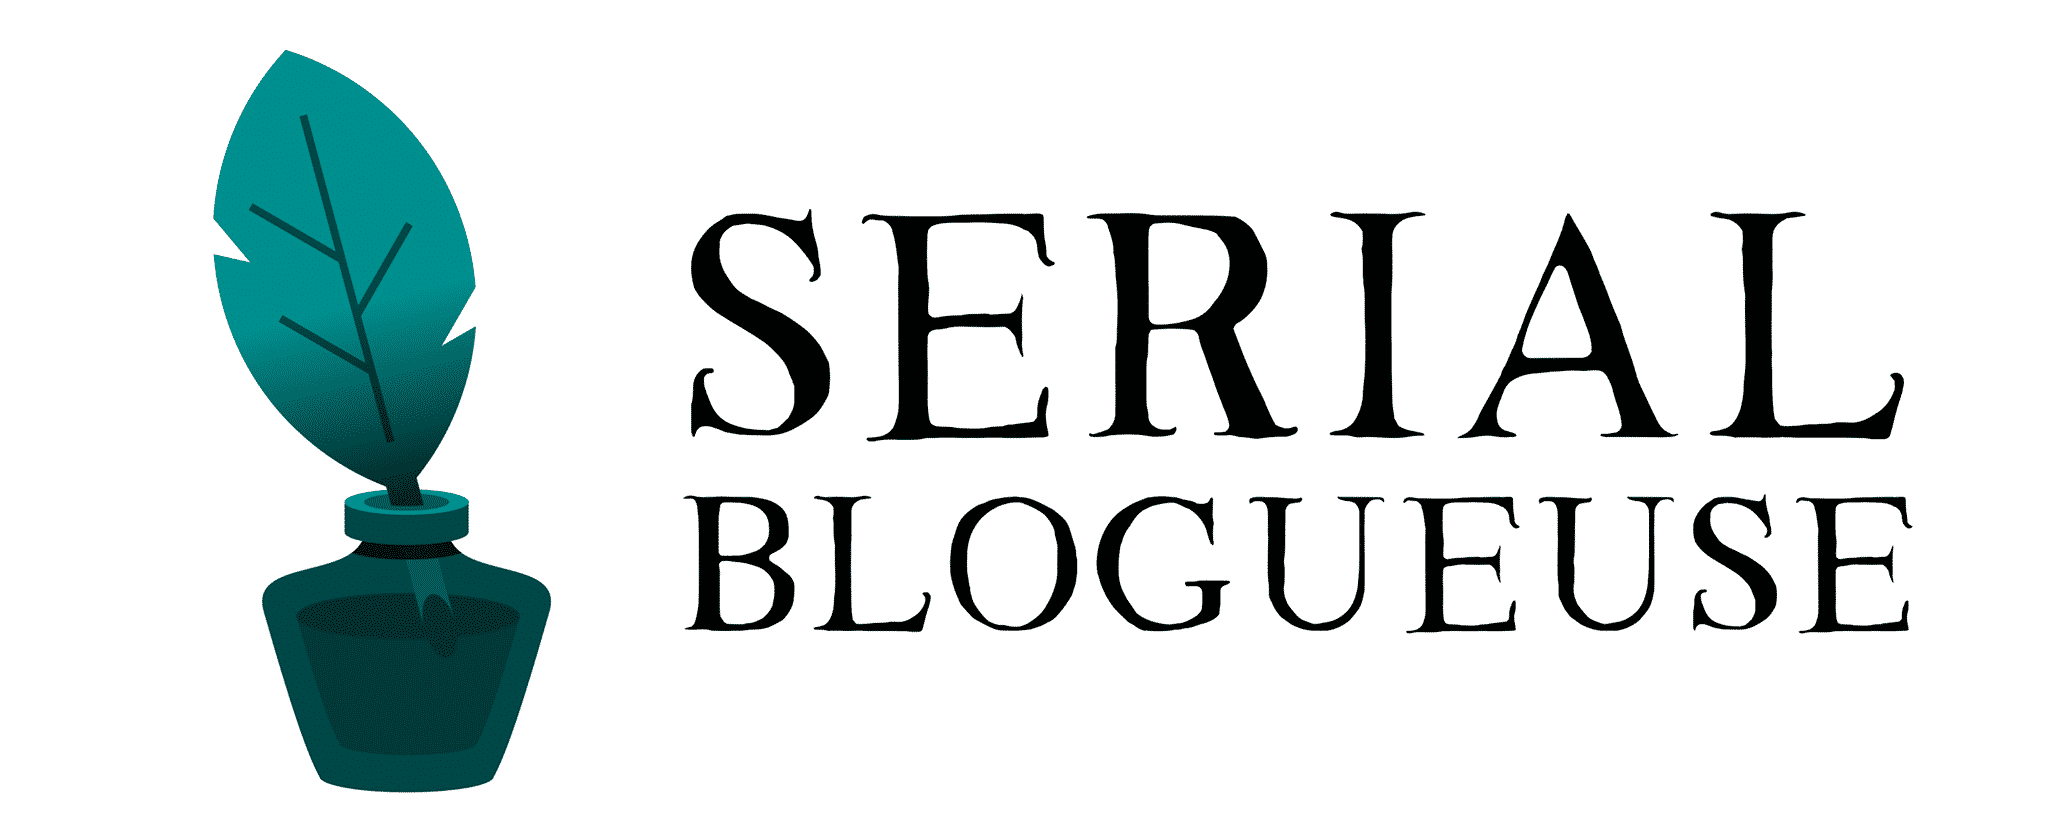 serial blogueuse